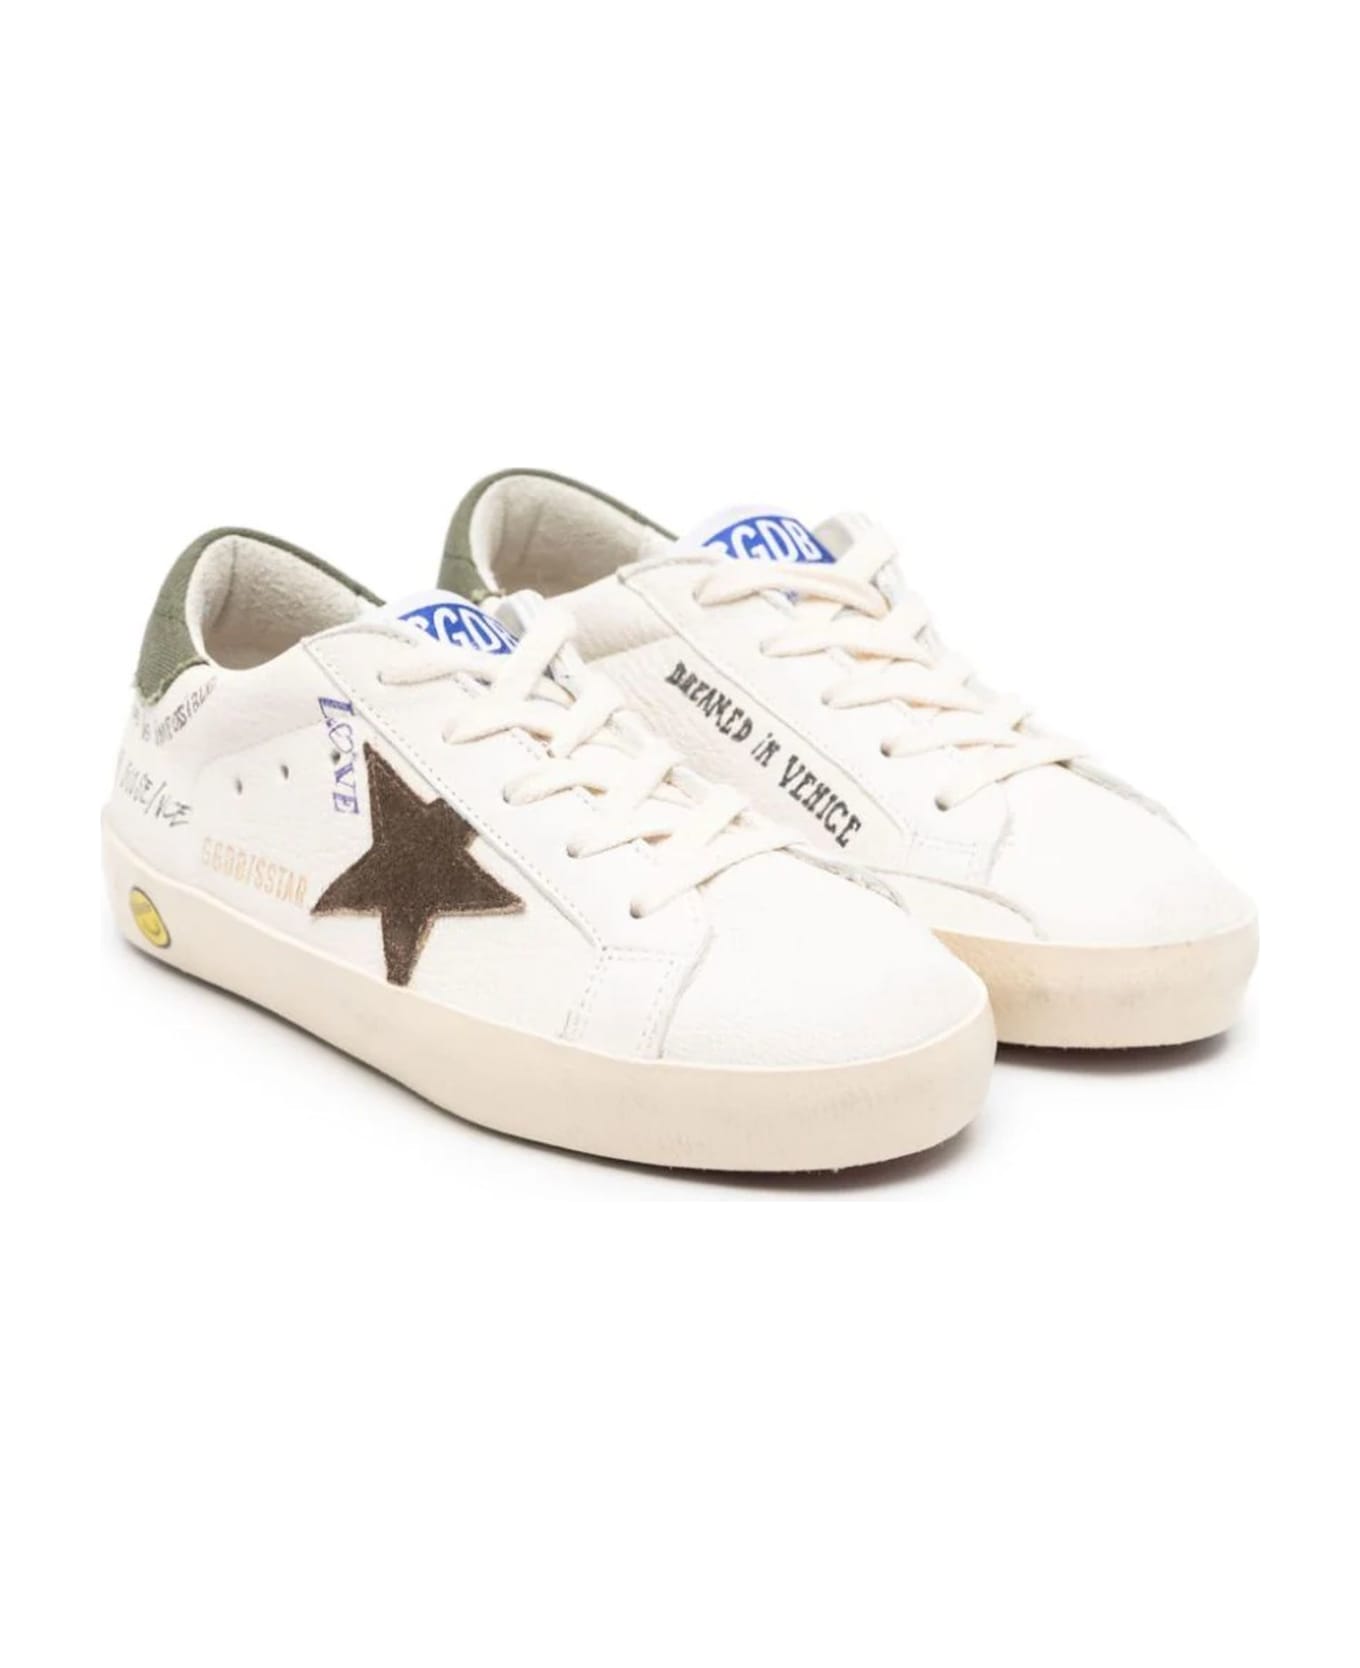 Golden Goose White Leather Sneakers - White /brown/ Green